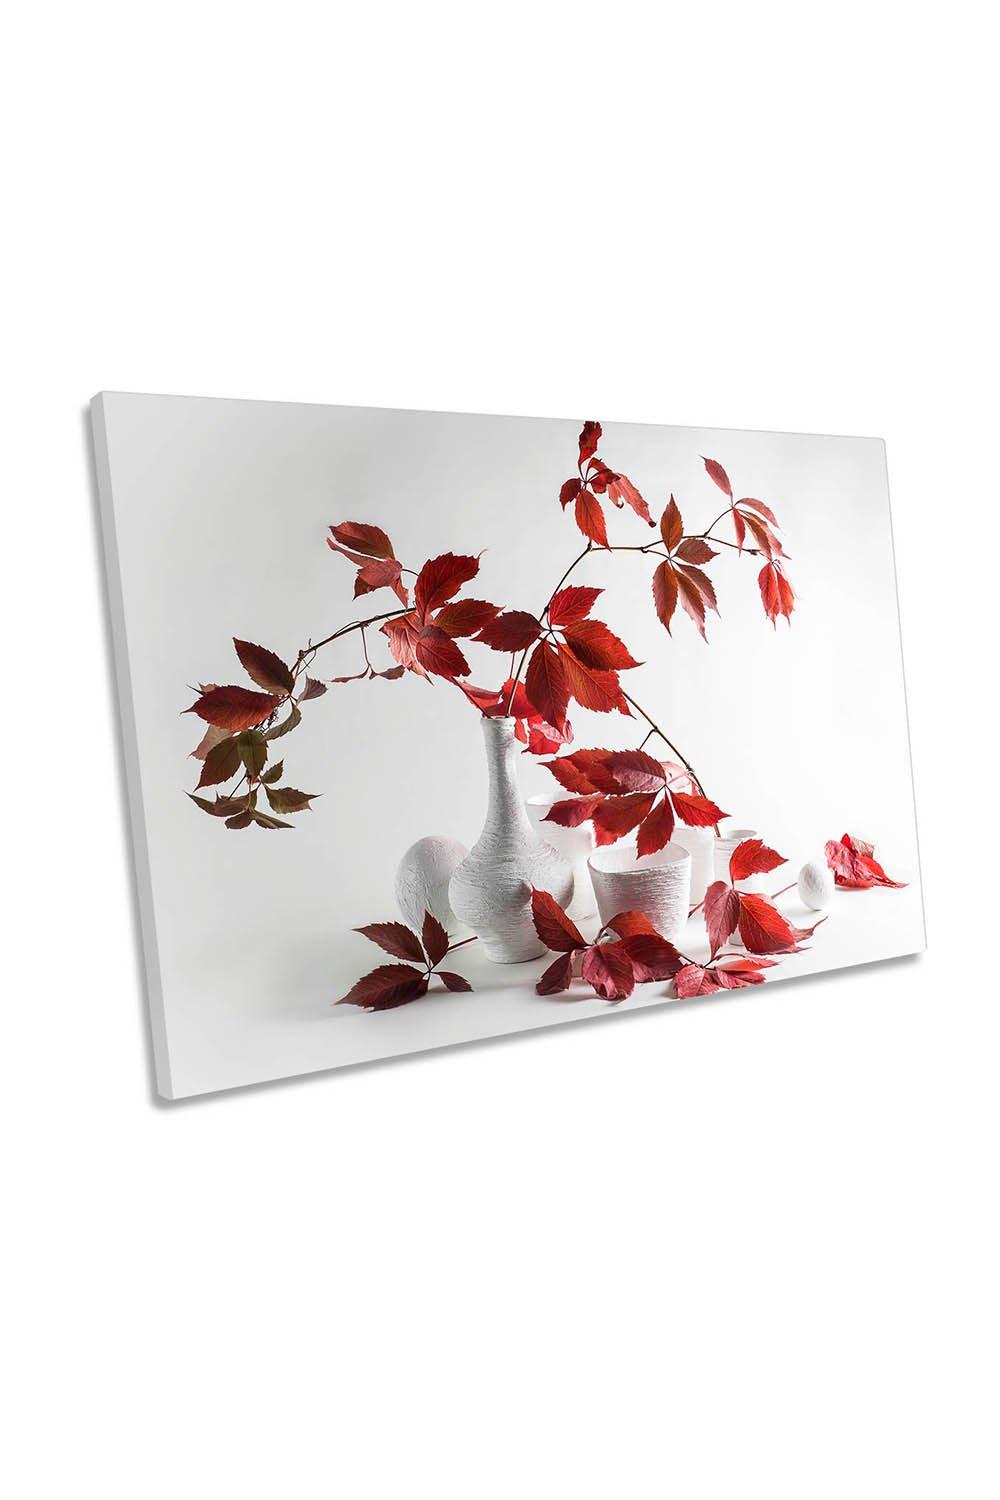 Red and White Leaves Vase Floral Canvas Wall Art Picture Print